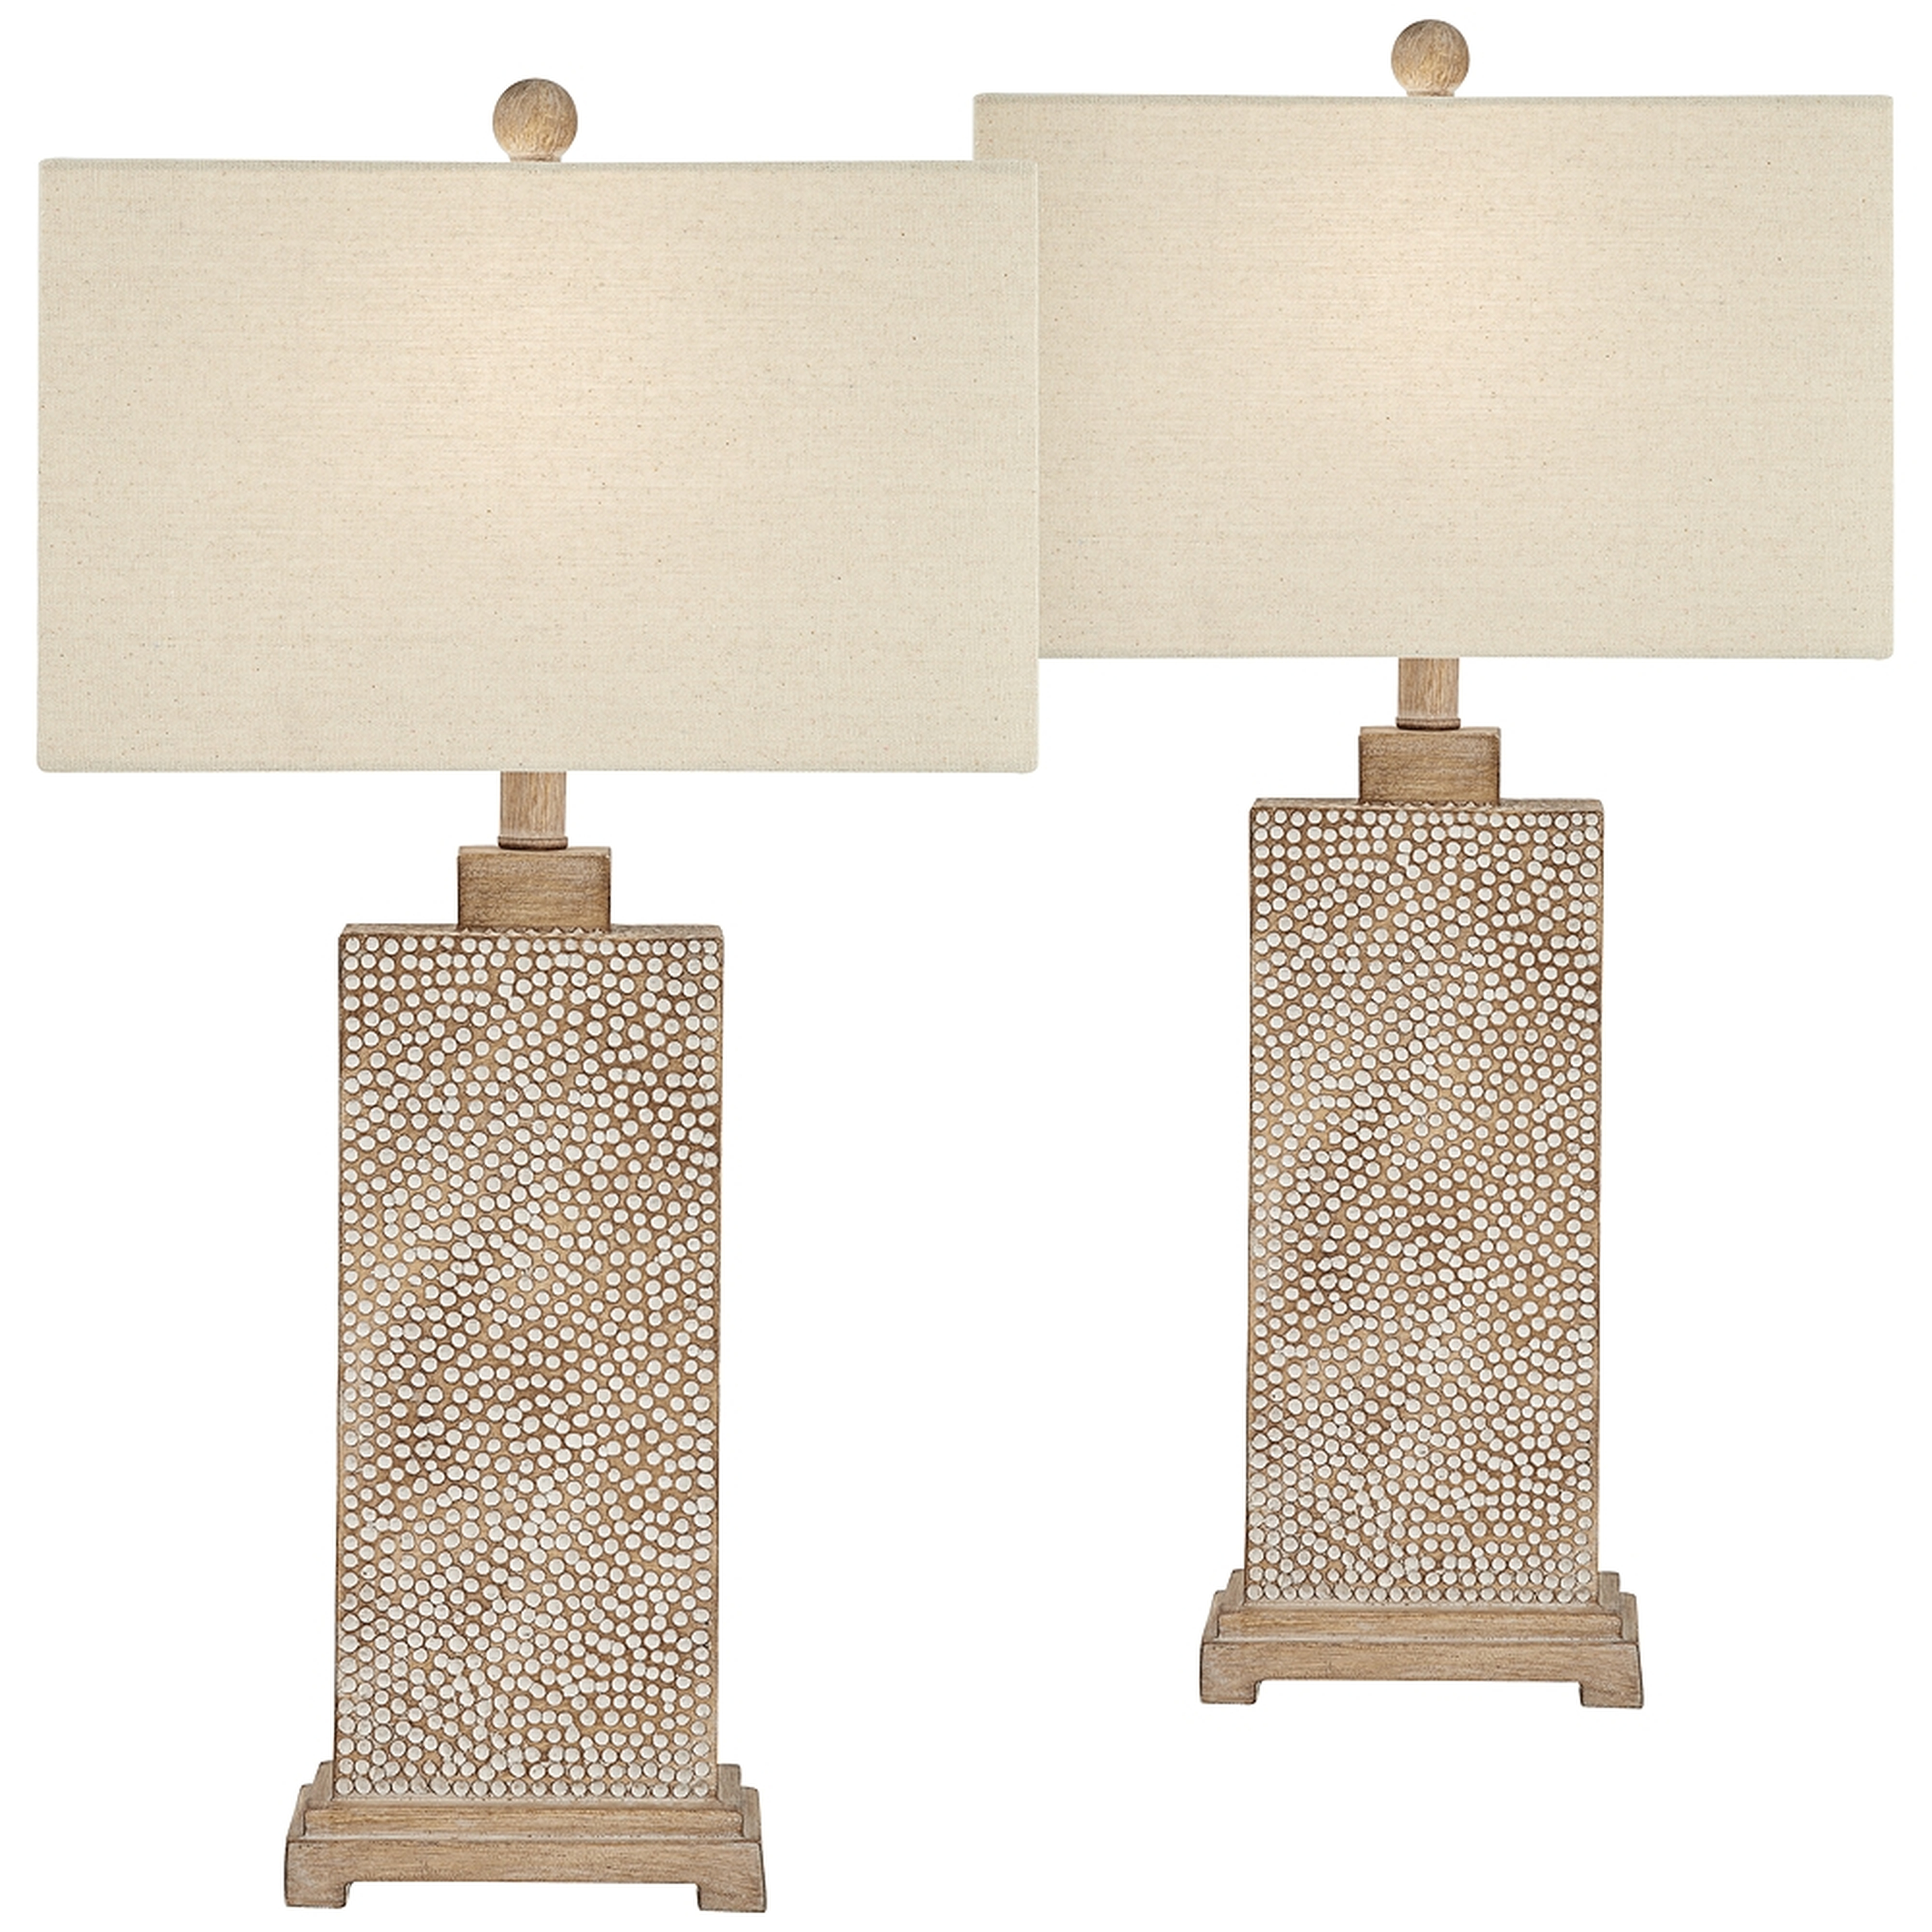 Caldwell Bronze Finish Hammered Base Table Lamps Set of 2 - Style # 94K54 - Lamps Plus